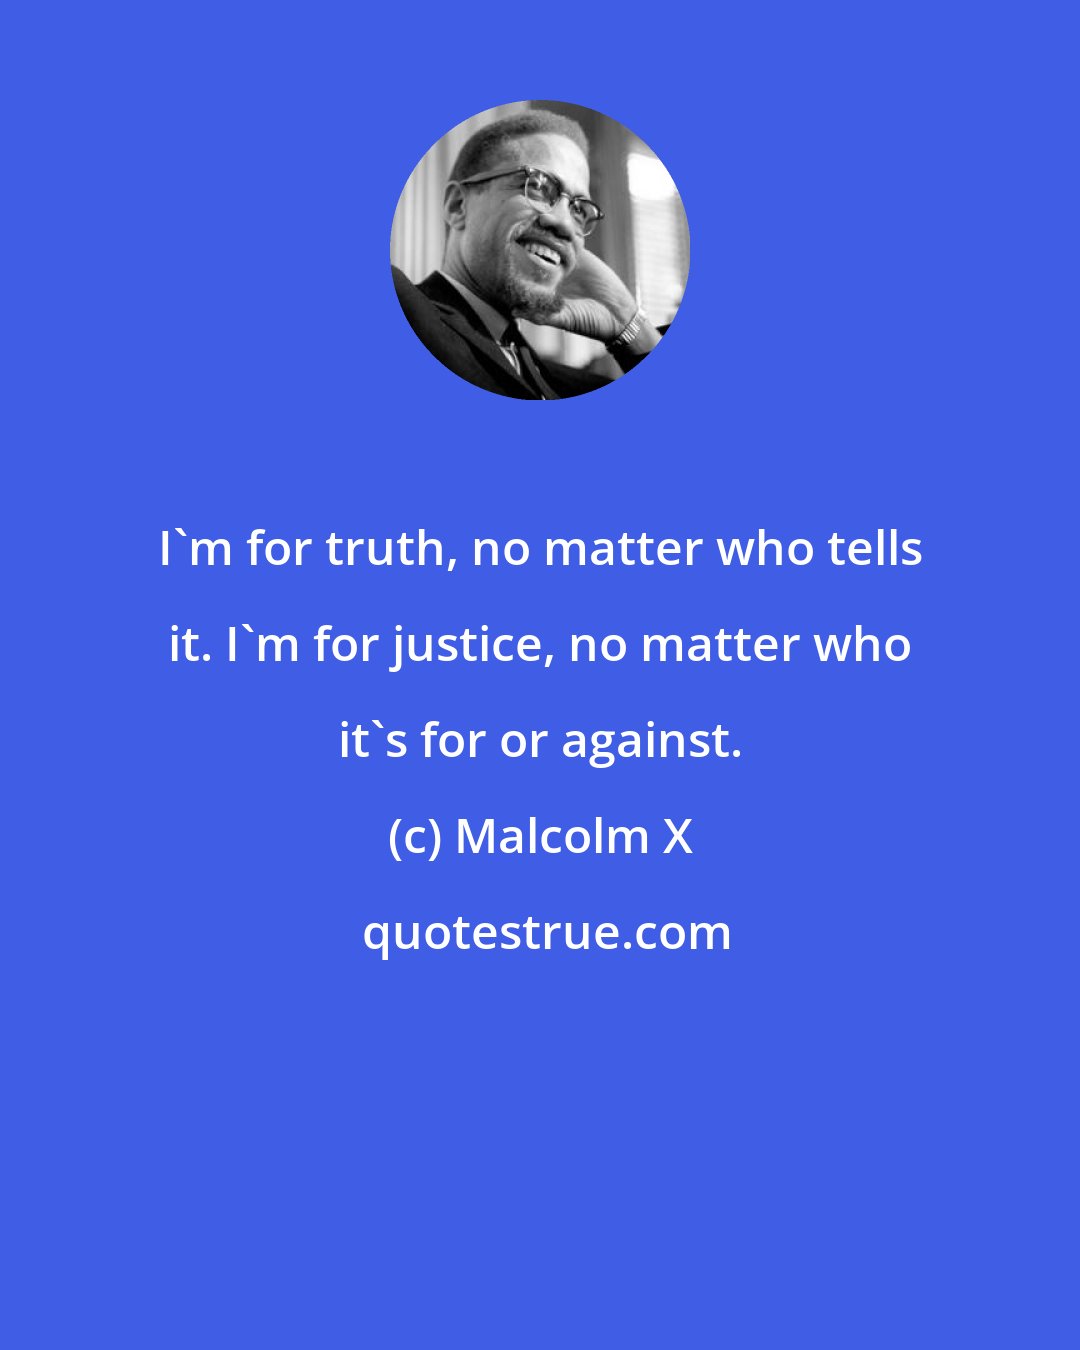 Malcolm X: I'm for truth, no matter who tells it. I'm for justice, no matter who it's for or against.